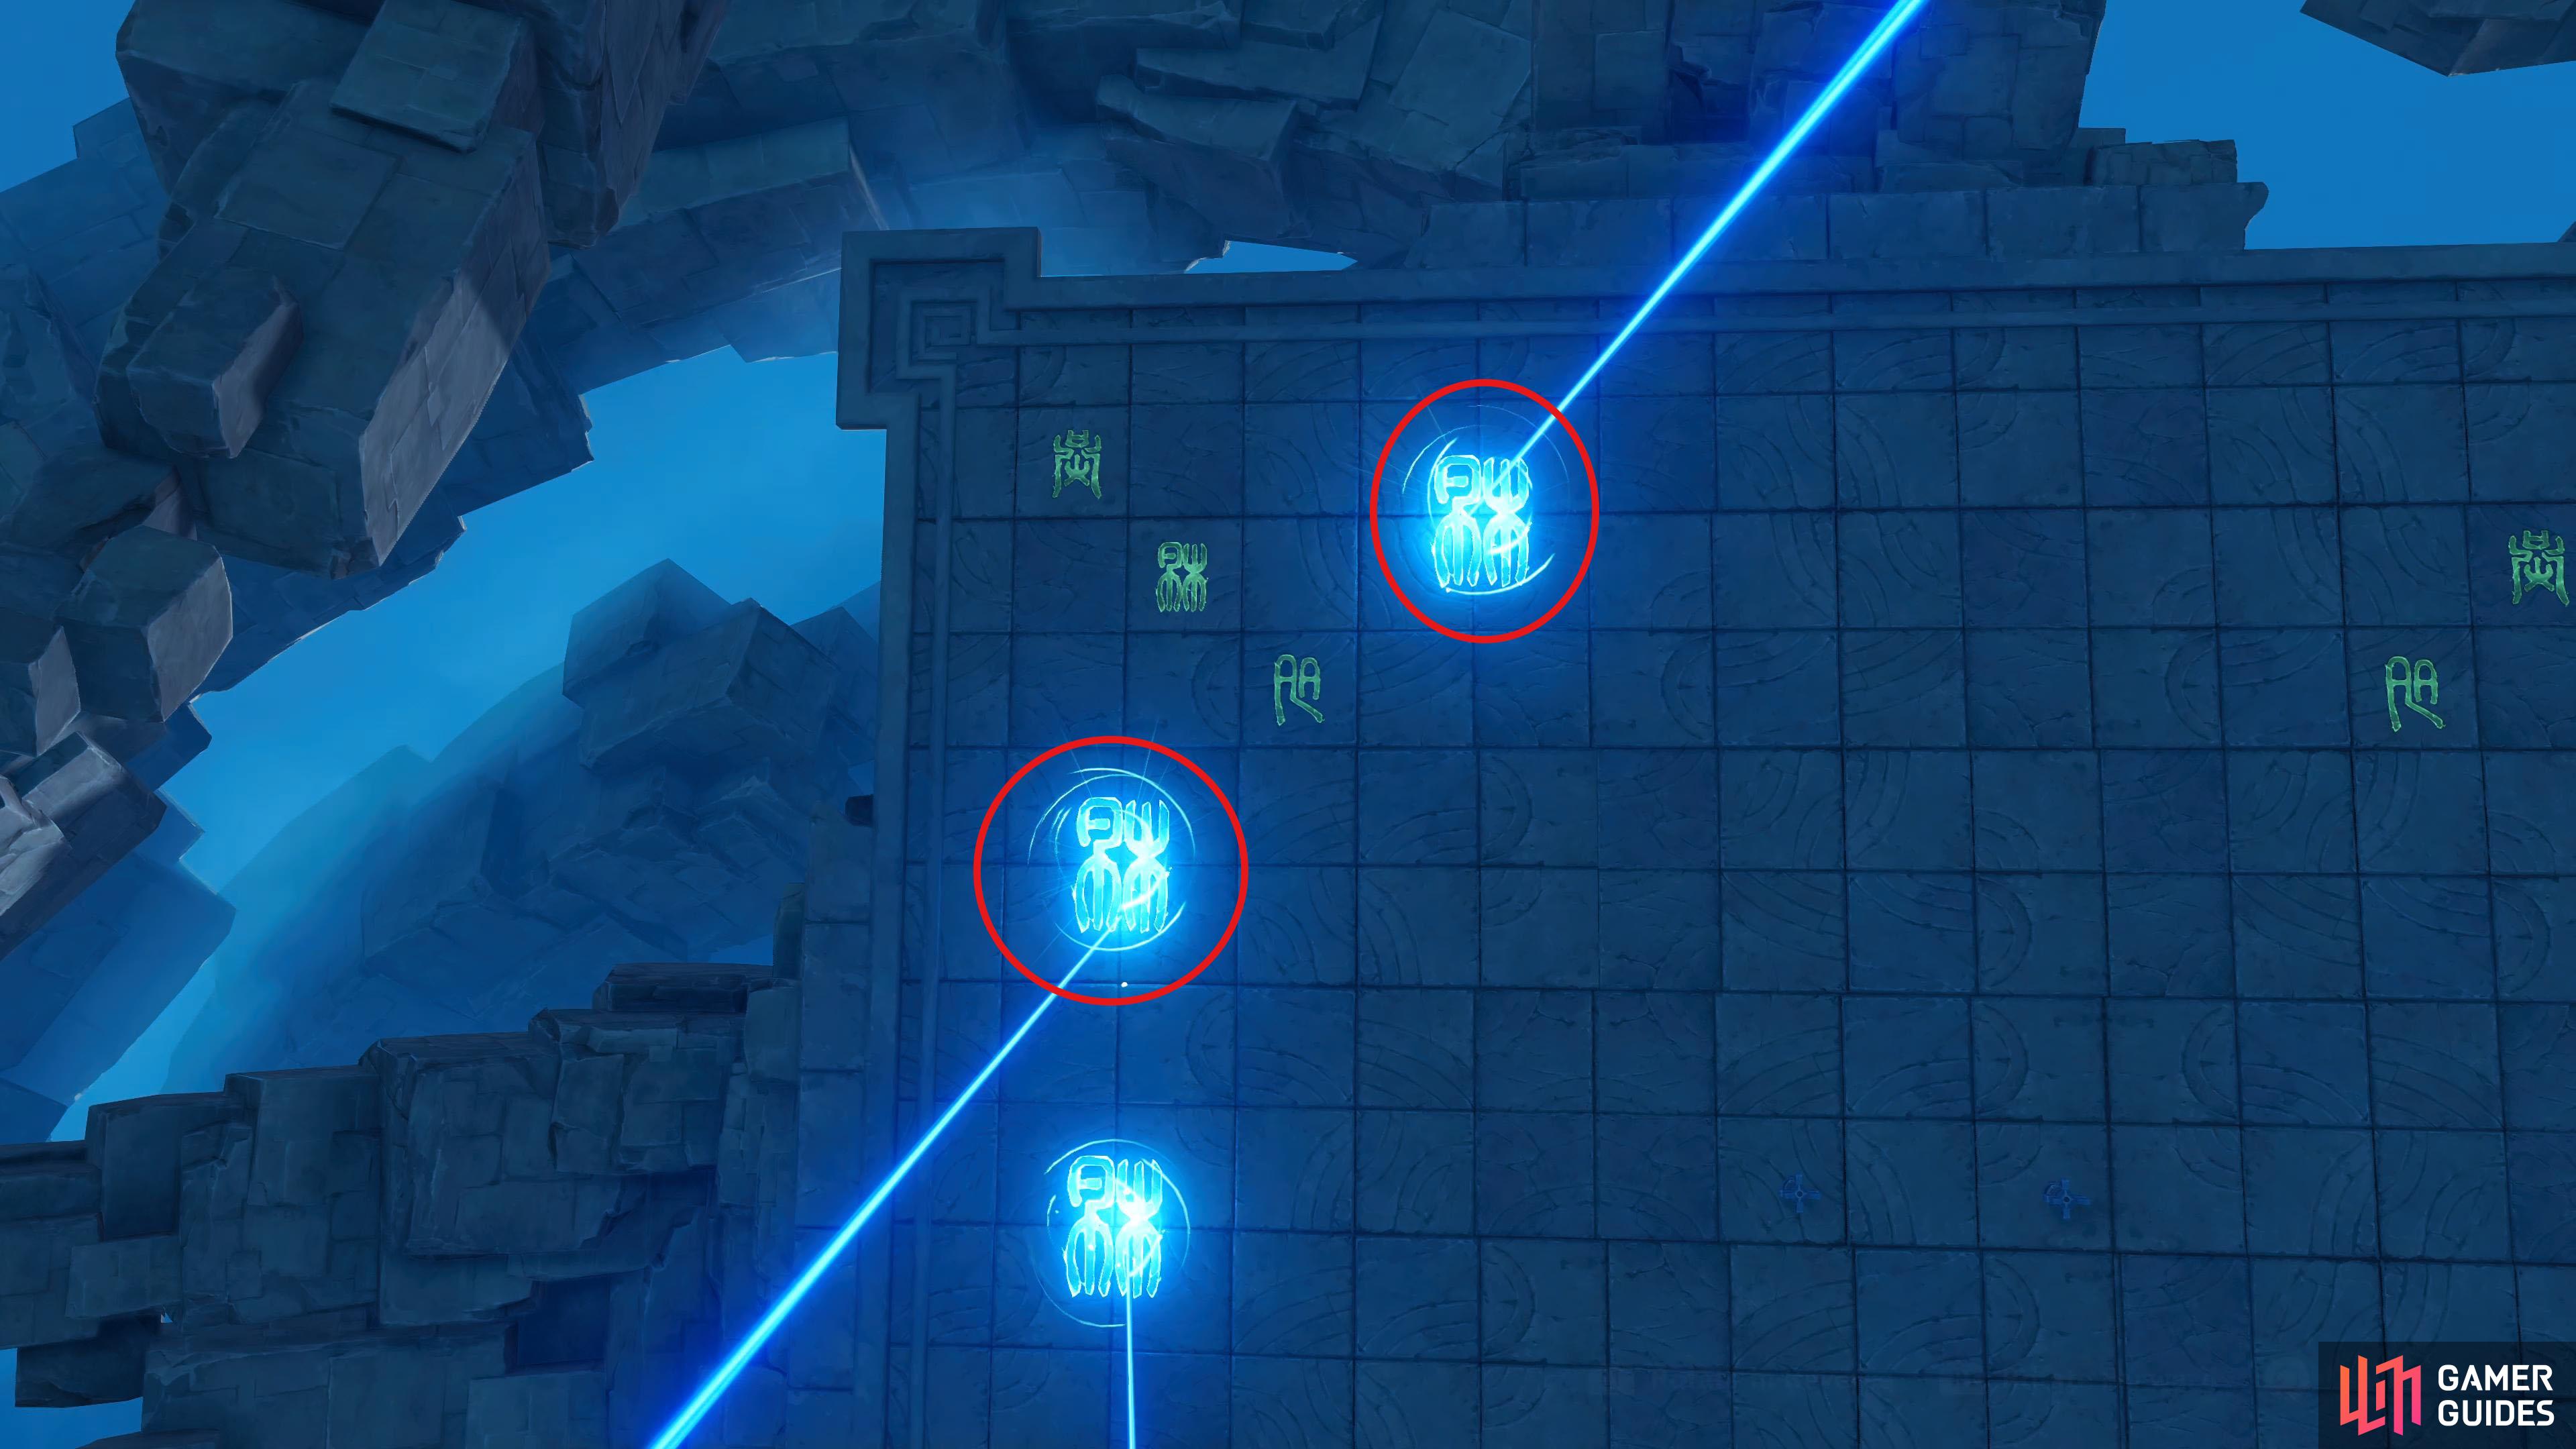 The Lightshaper with the smallest gap between the beams needs to activate the runes in the nortwest corner.